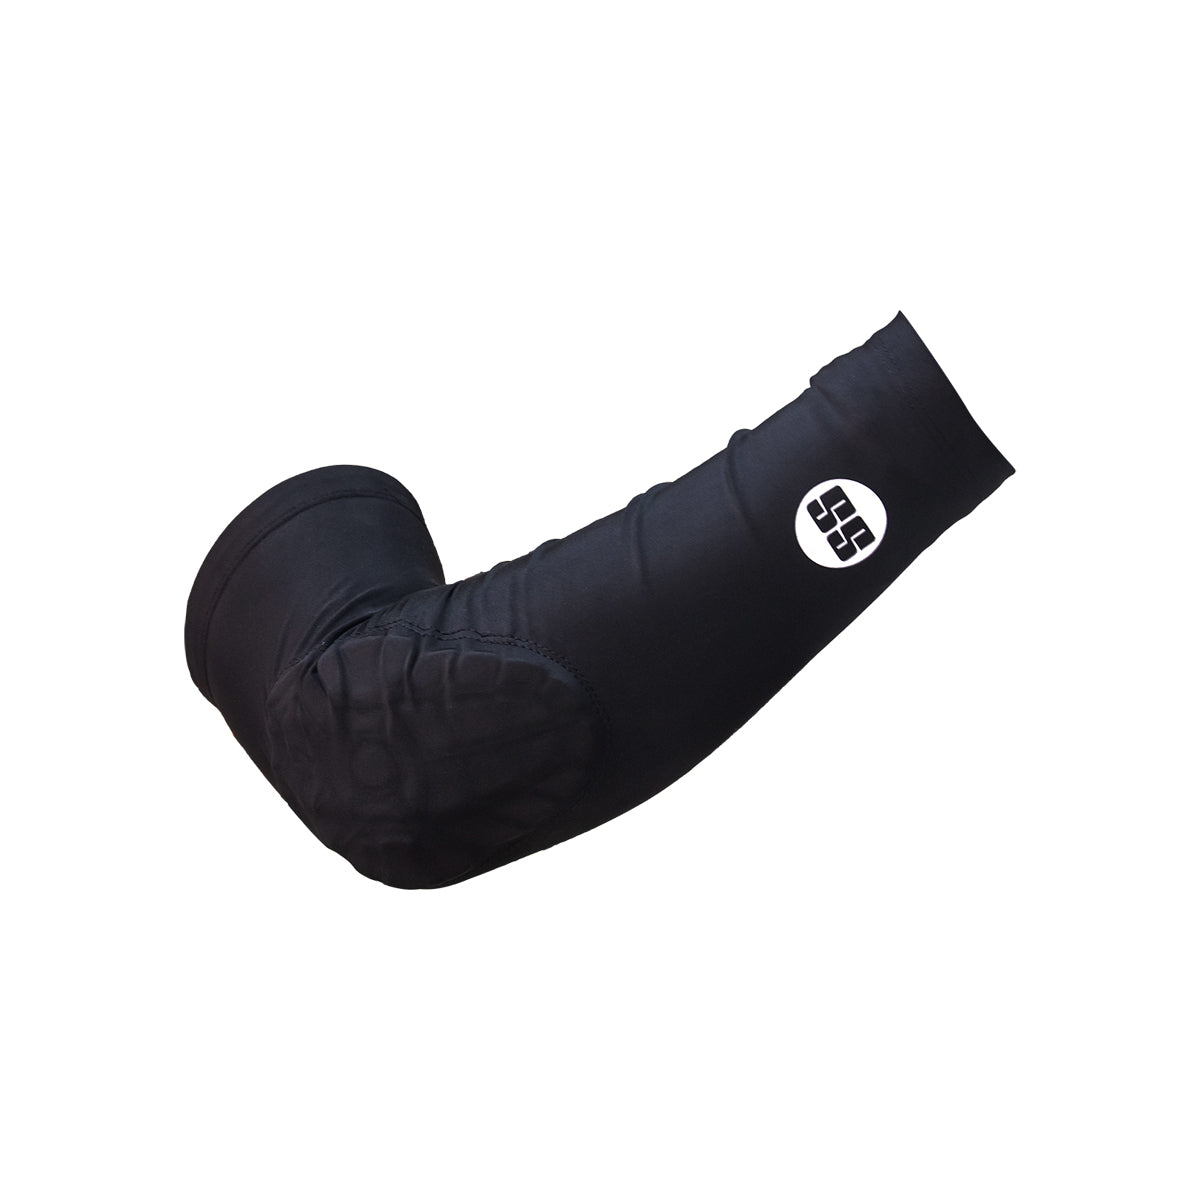 SS Pro Super Padded Elbow Sleeve for Adult and Youth